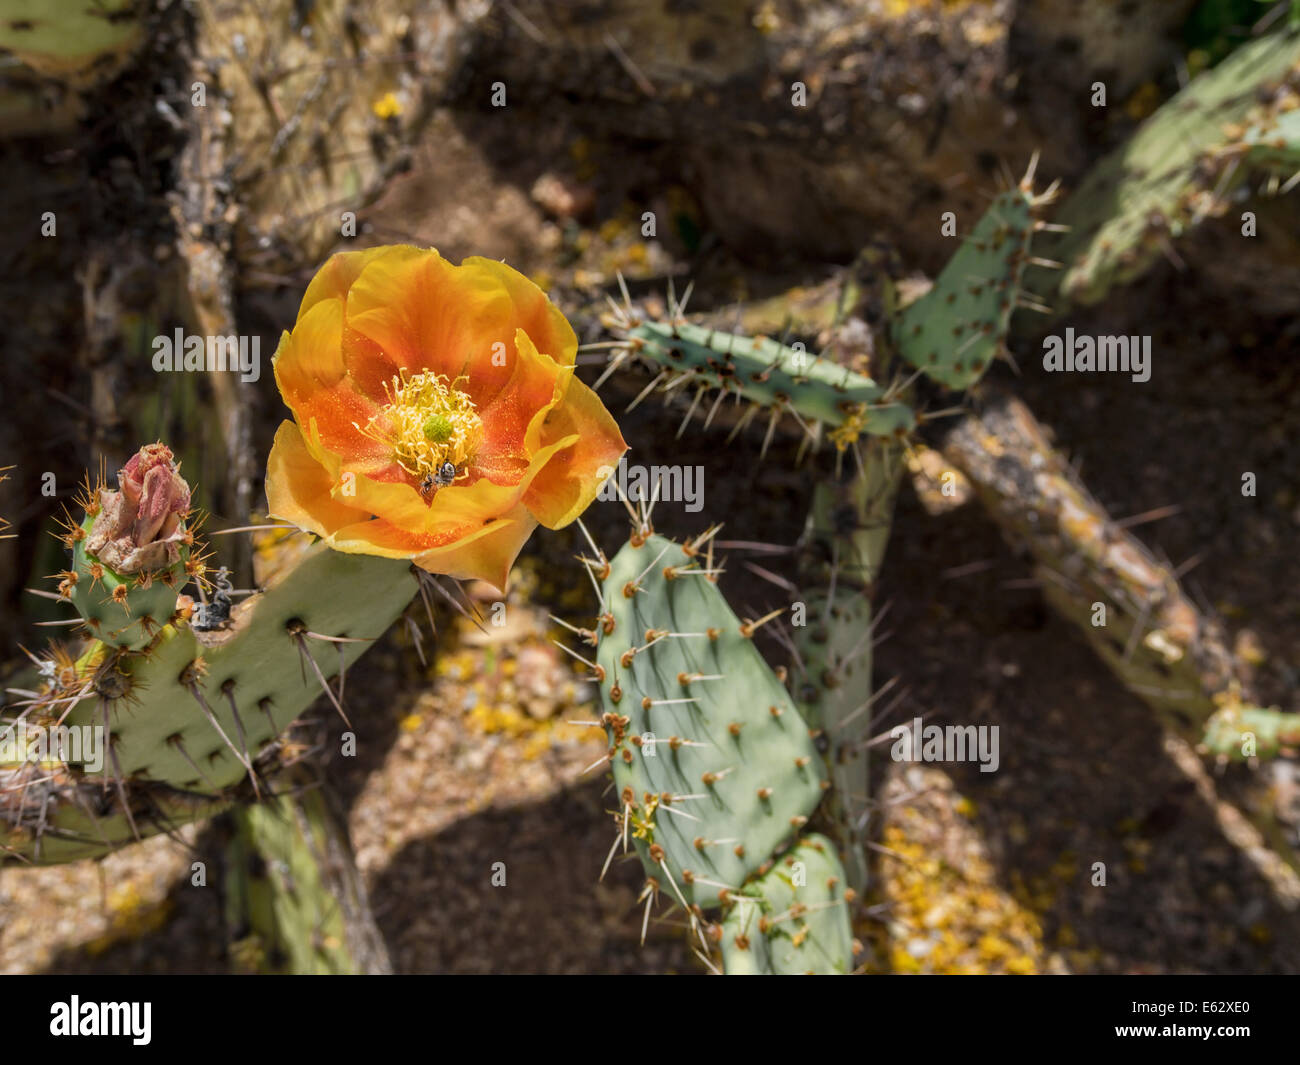 Close up of leafcutter bee pollinating yellow and orange flower blooming on porcupine prickly pear cactus Arizona Sonoran desert Stock Photo